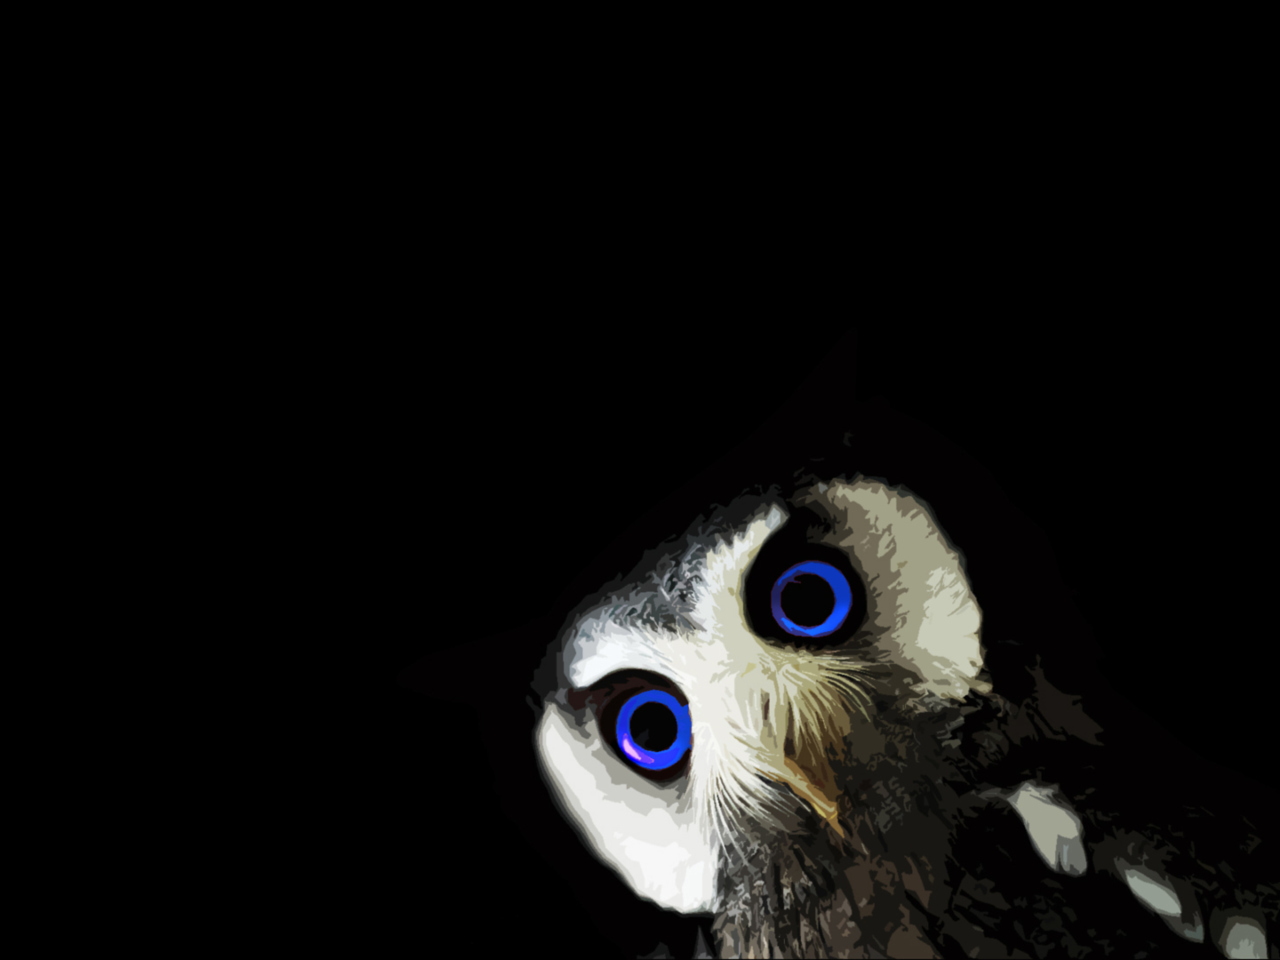 Funny Owl With Big Blue Eyes wallpaper 1280x960